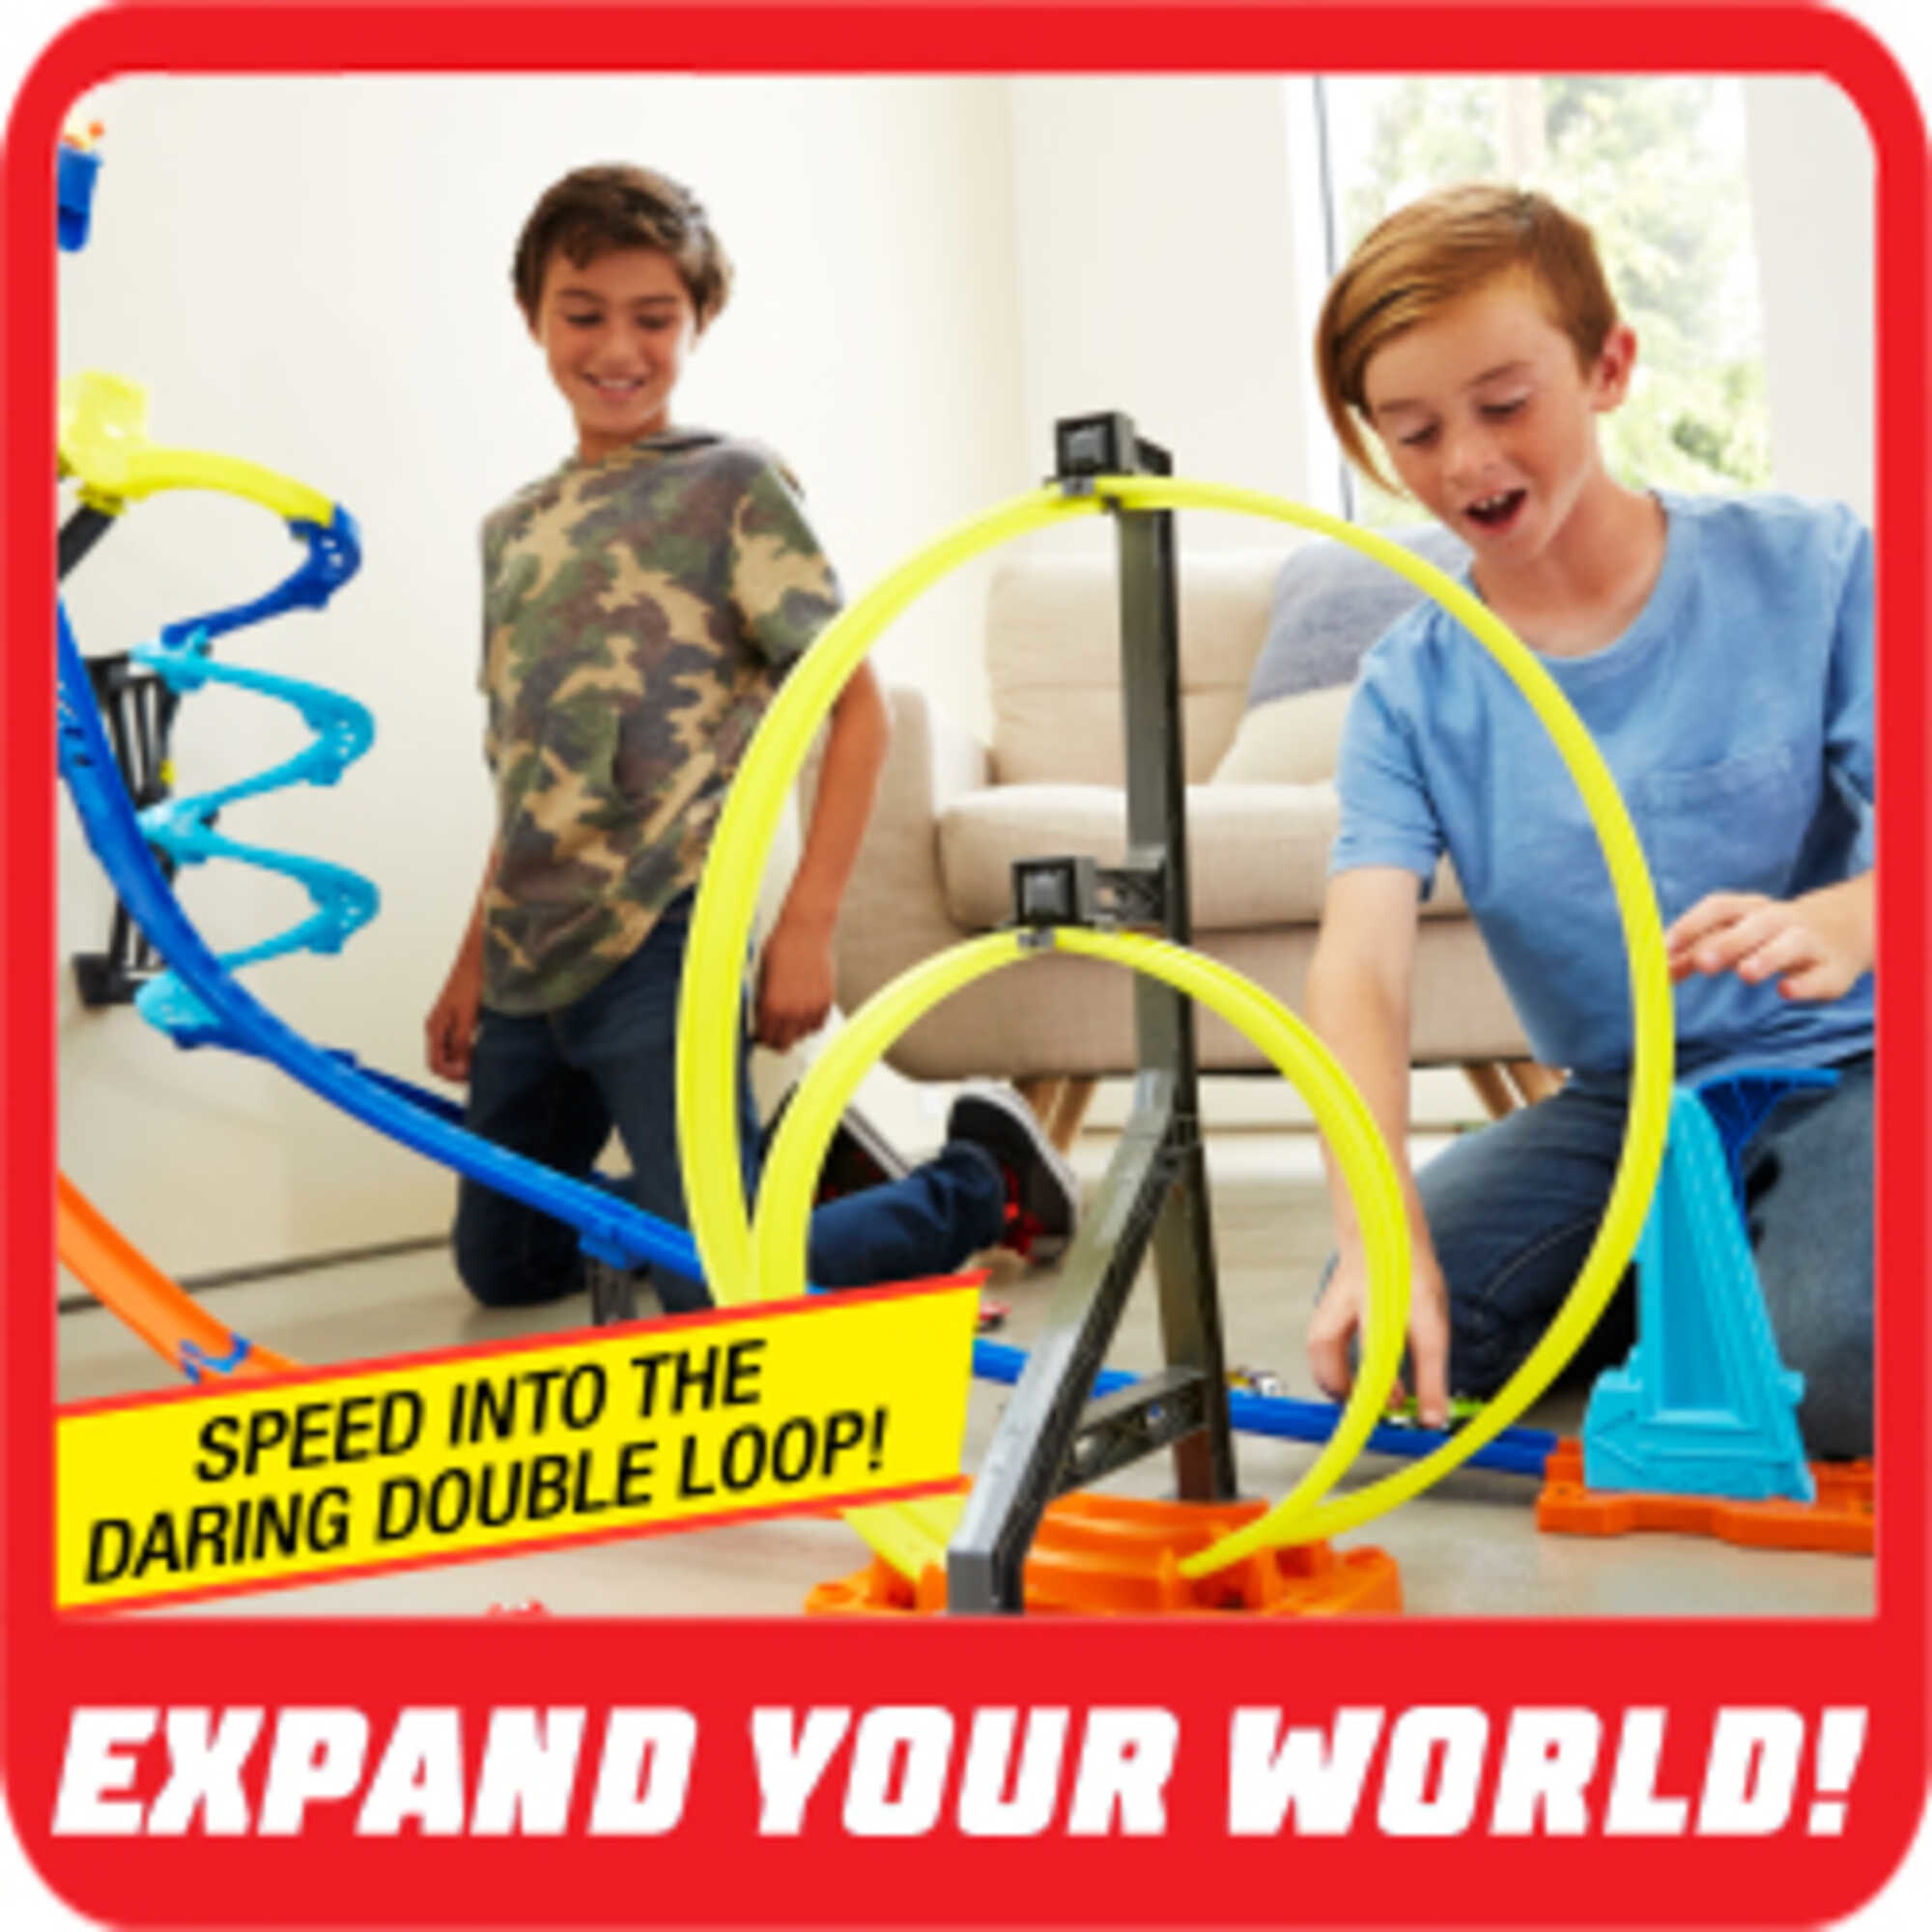 Hot Wheels Track Builder Vertical Launch Kit, 50-in Tall, 3 Configurations & 1 Toy Car - image 2 of 6